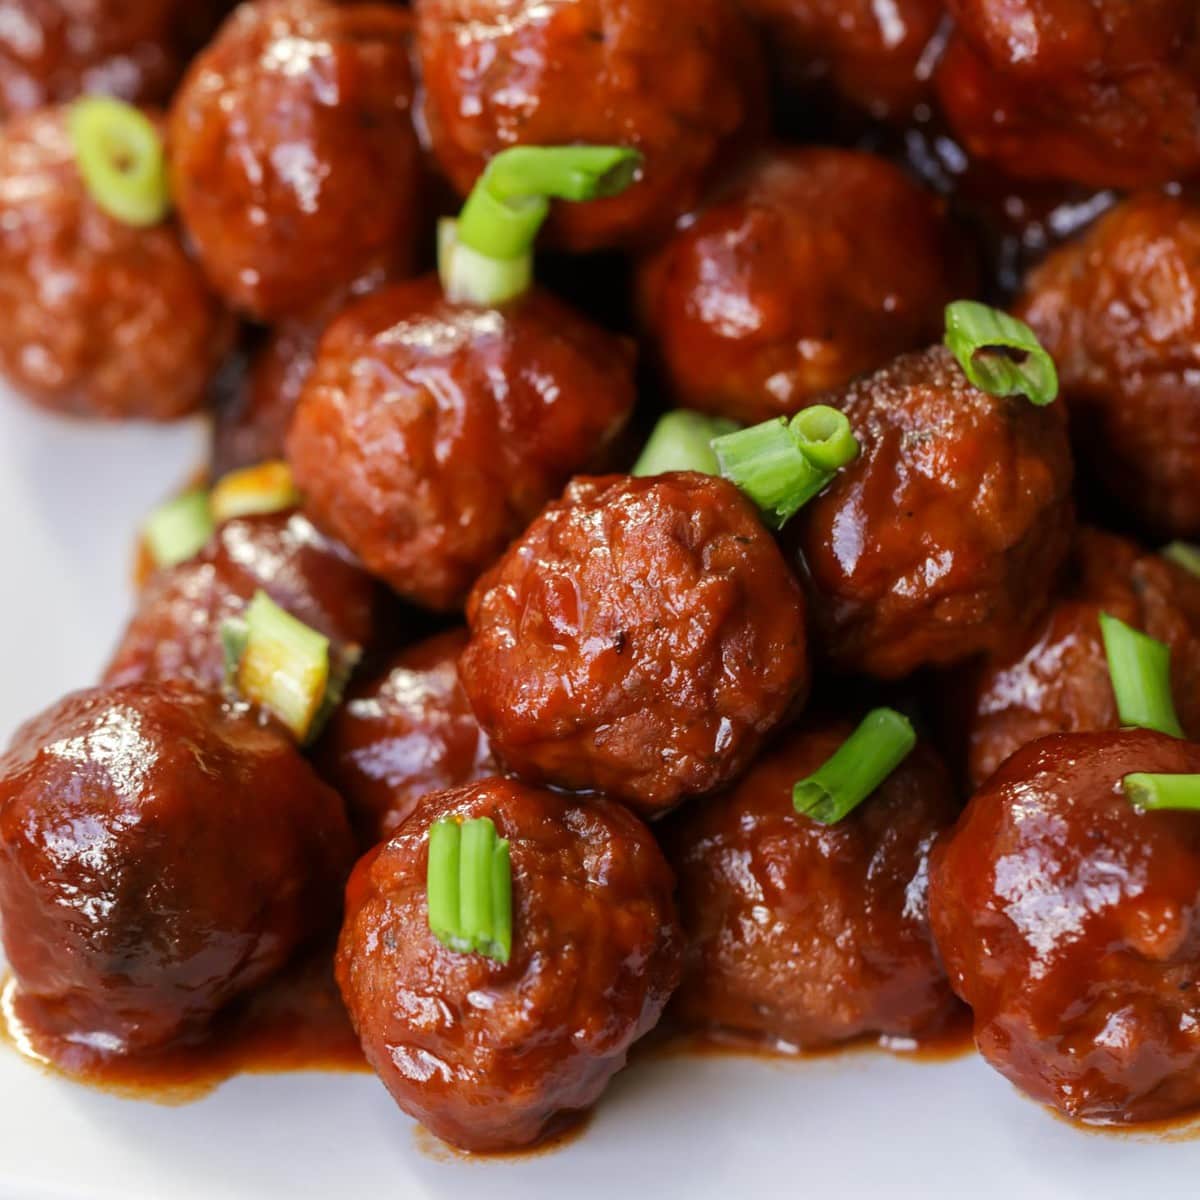 Easy Appetizers - Grape Jelly Meatballs garnished with diced green onions on a white plate. 